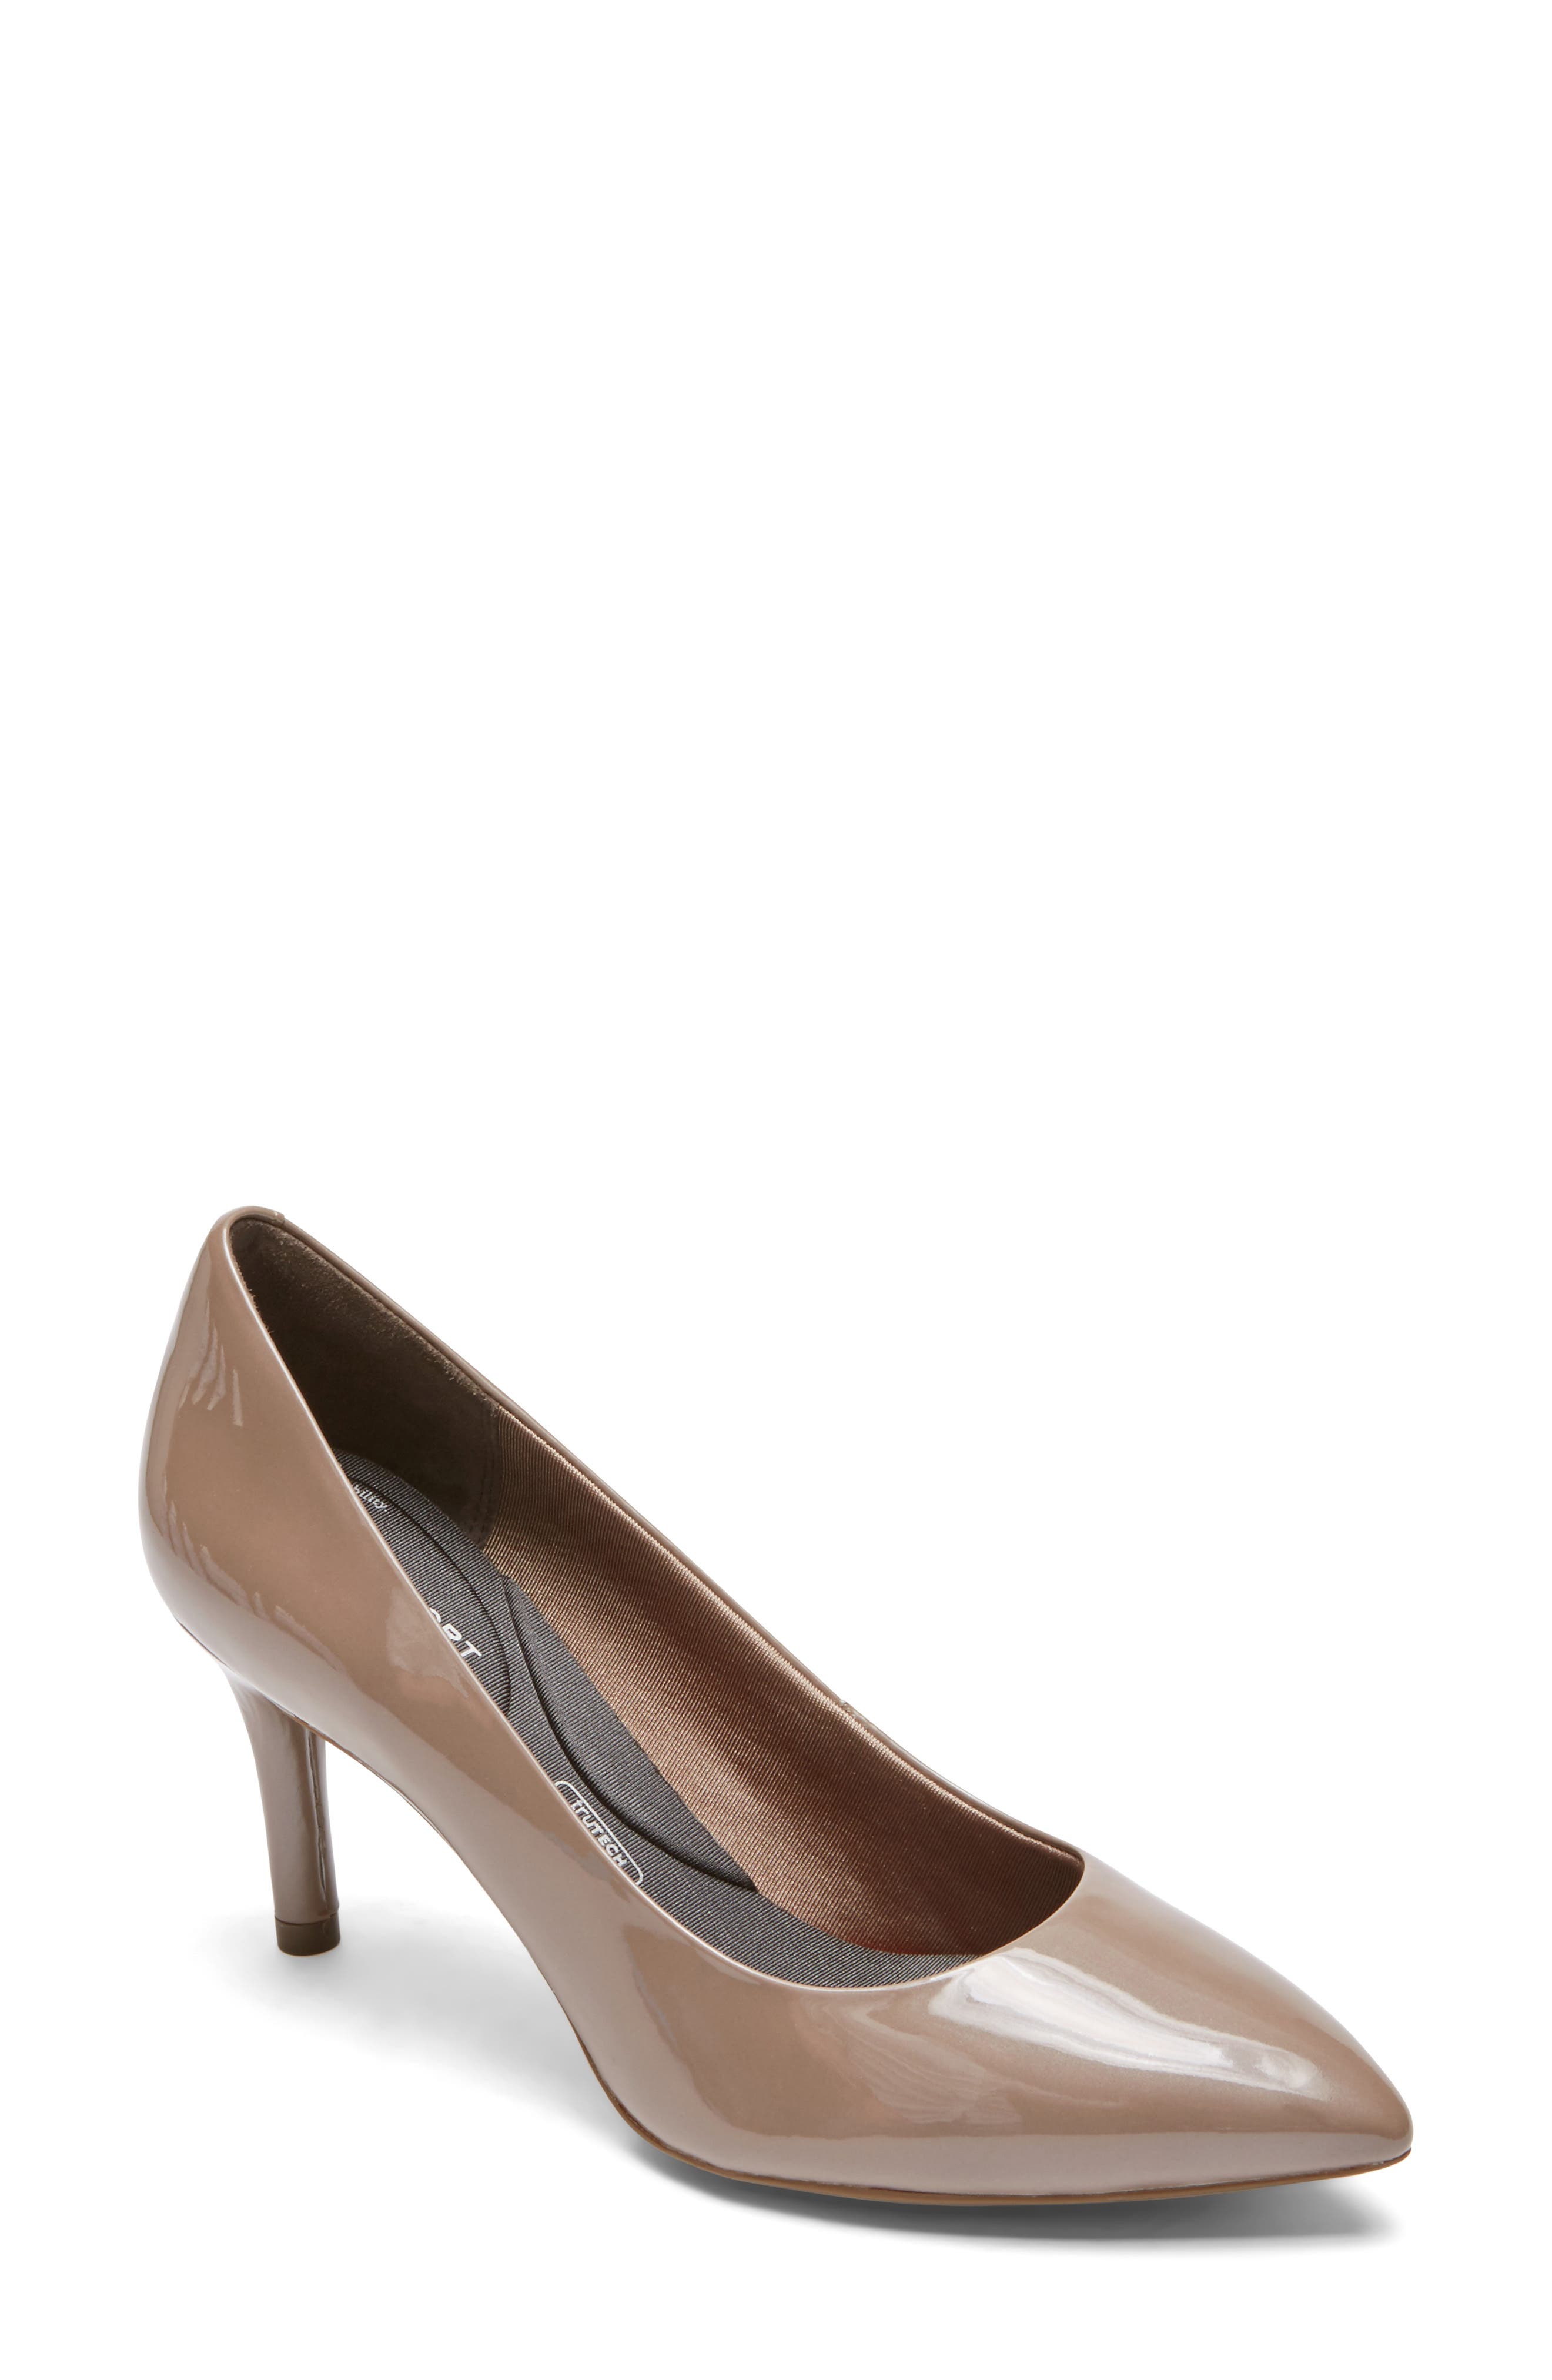 arch support pumps